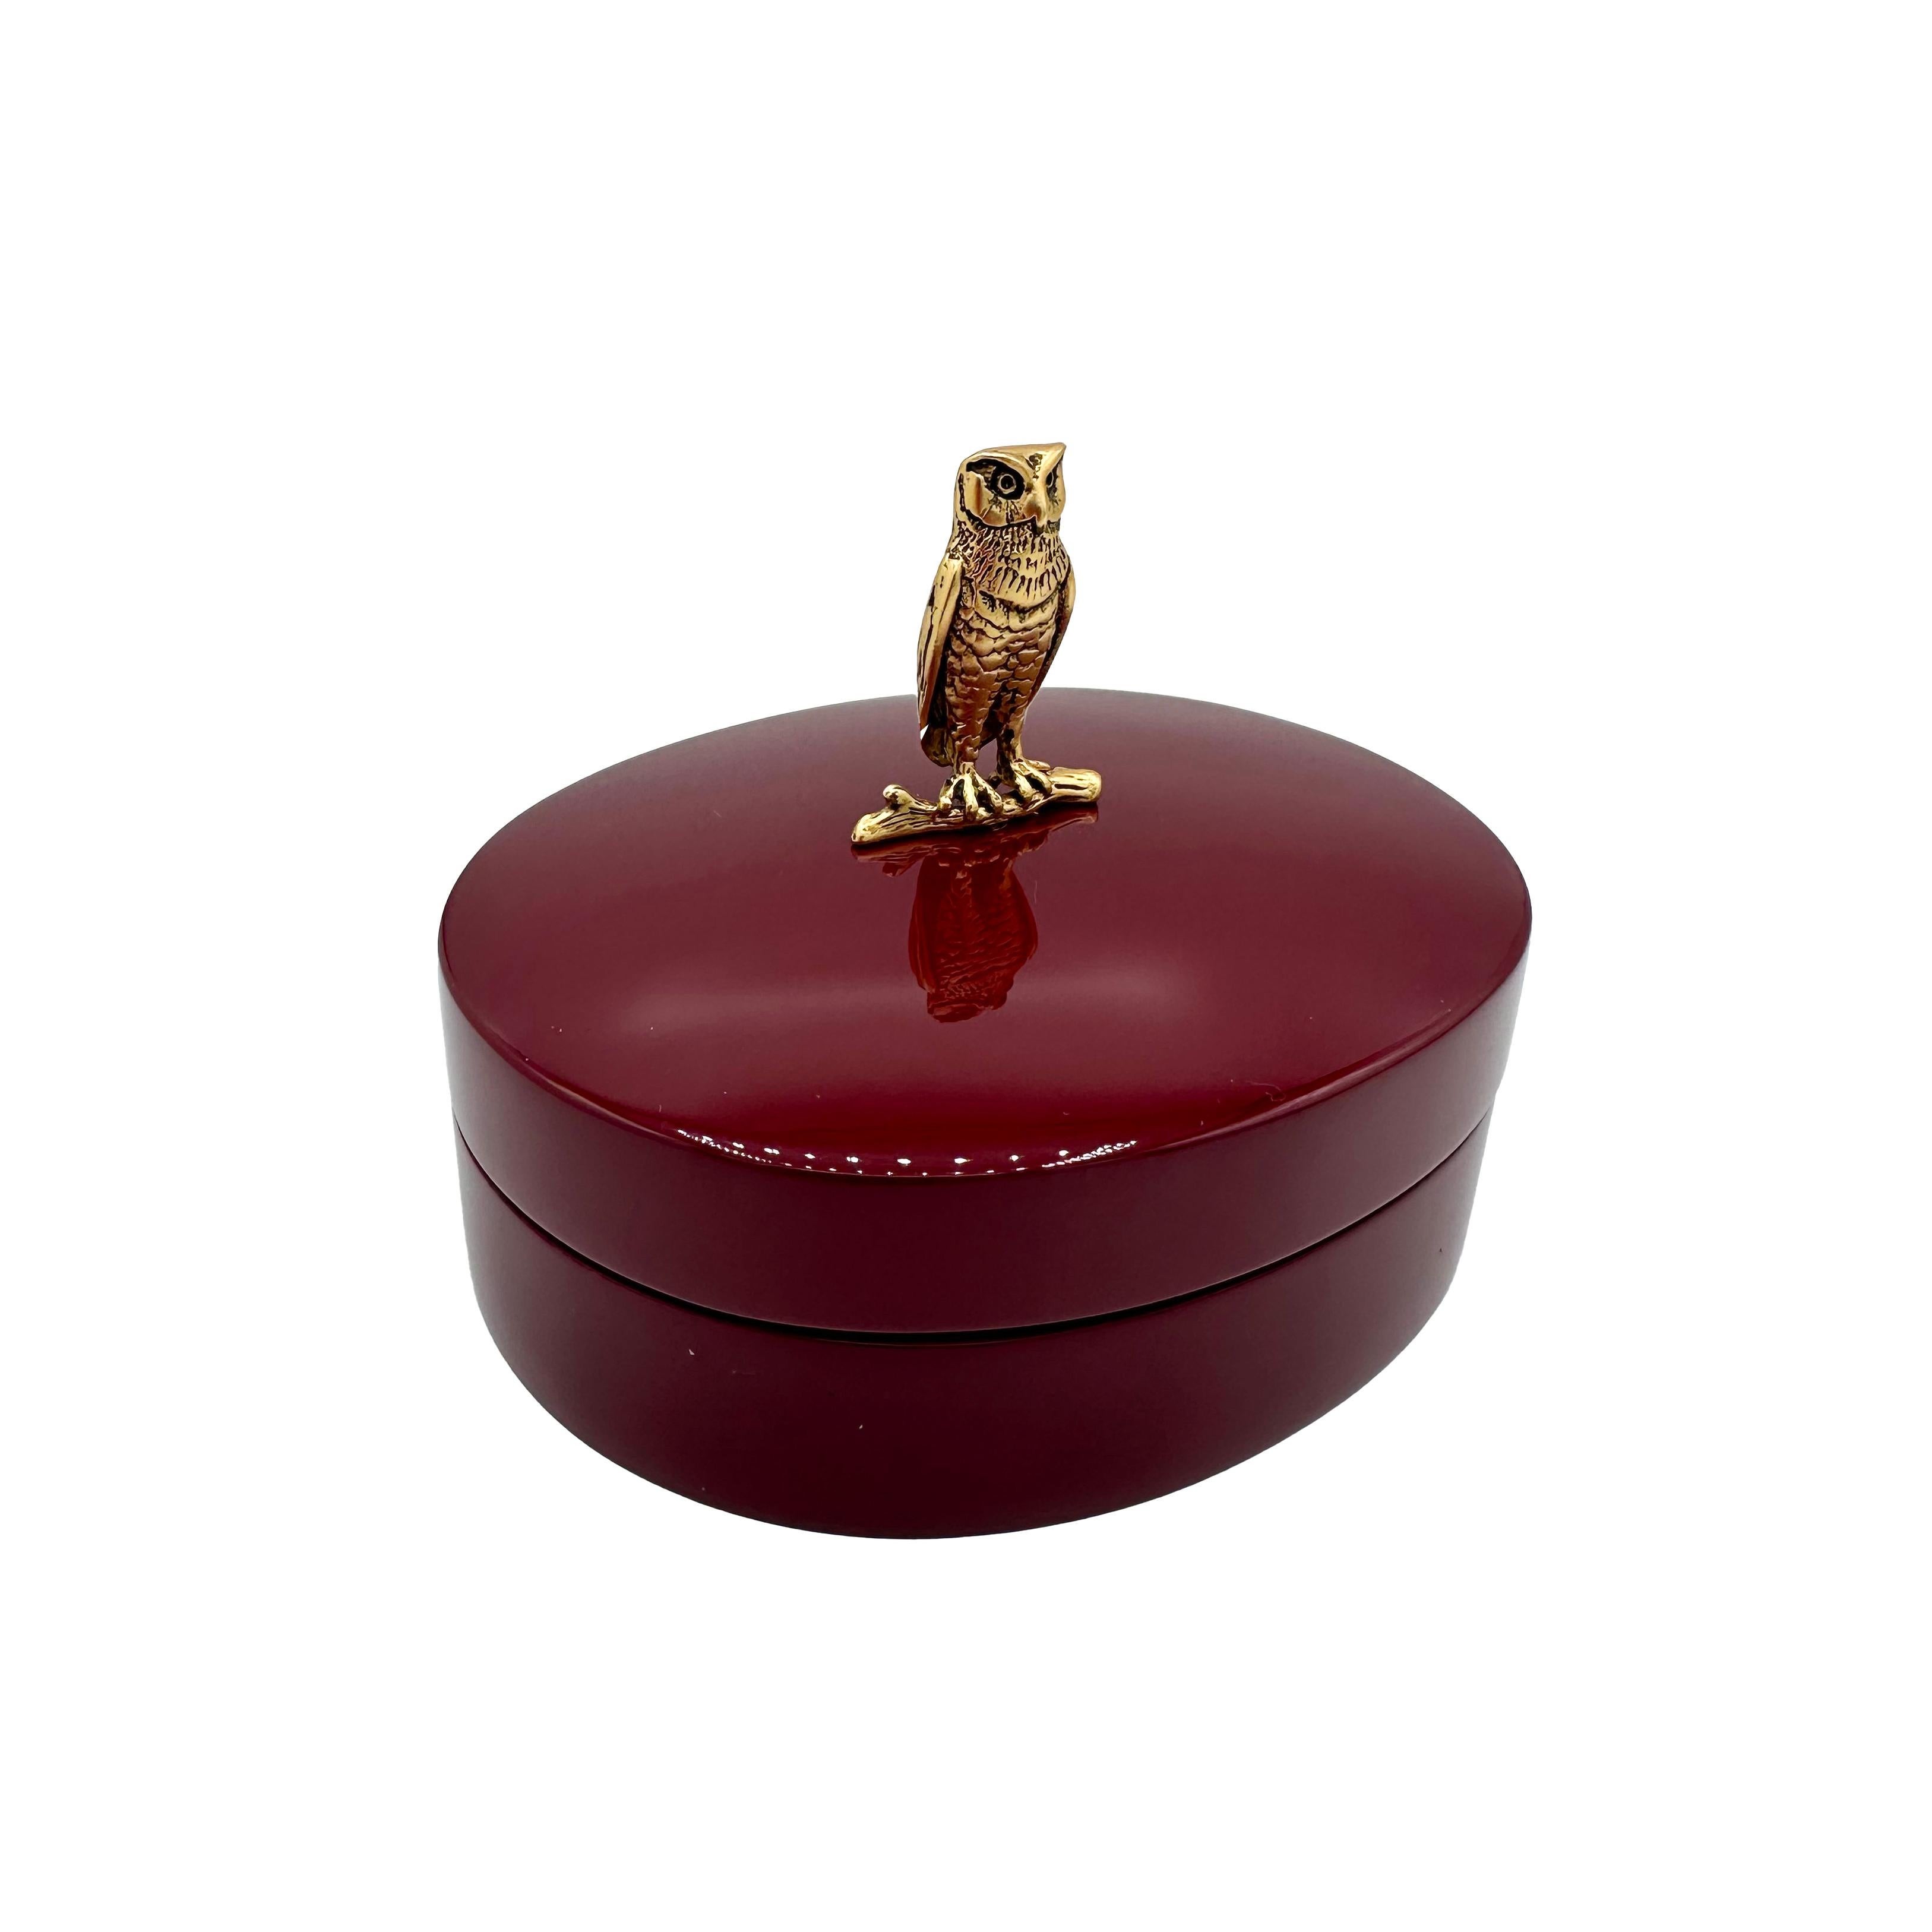 Our Wise Box is like a Faberge's objects de virtu, yet wildly modern lacquer. The box is exquisitely made by The Lacquer Company especially for Janet Mavec in a rich teal or burgundy—for your dresser or desk. The hand cast owl is delicious in all